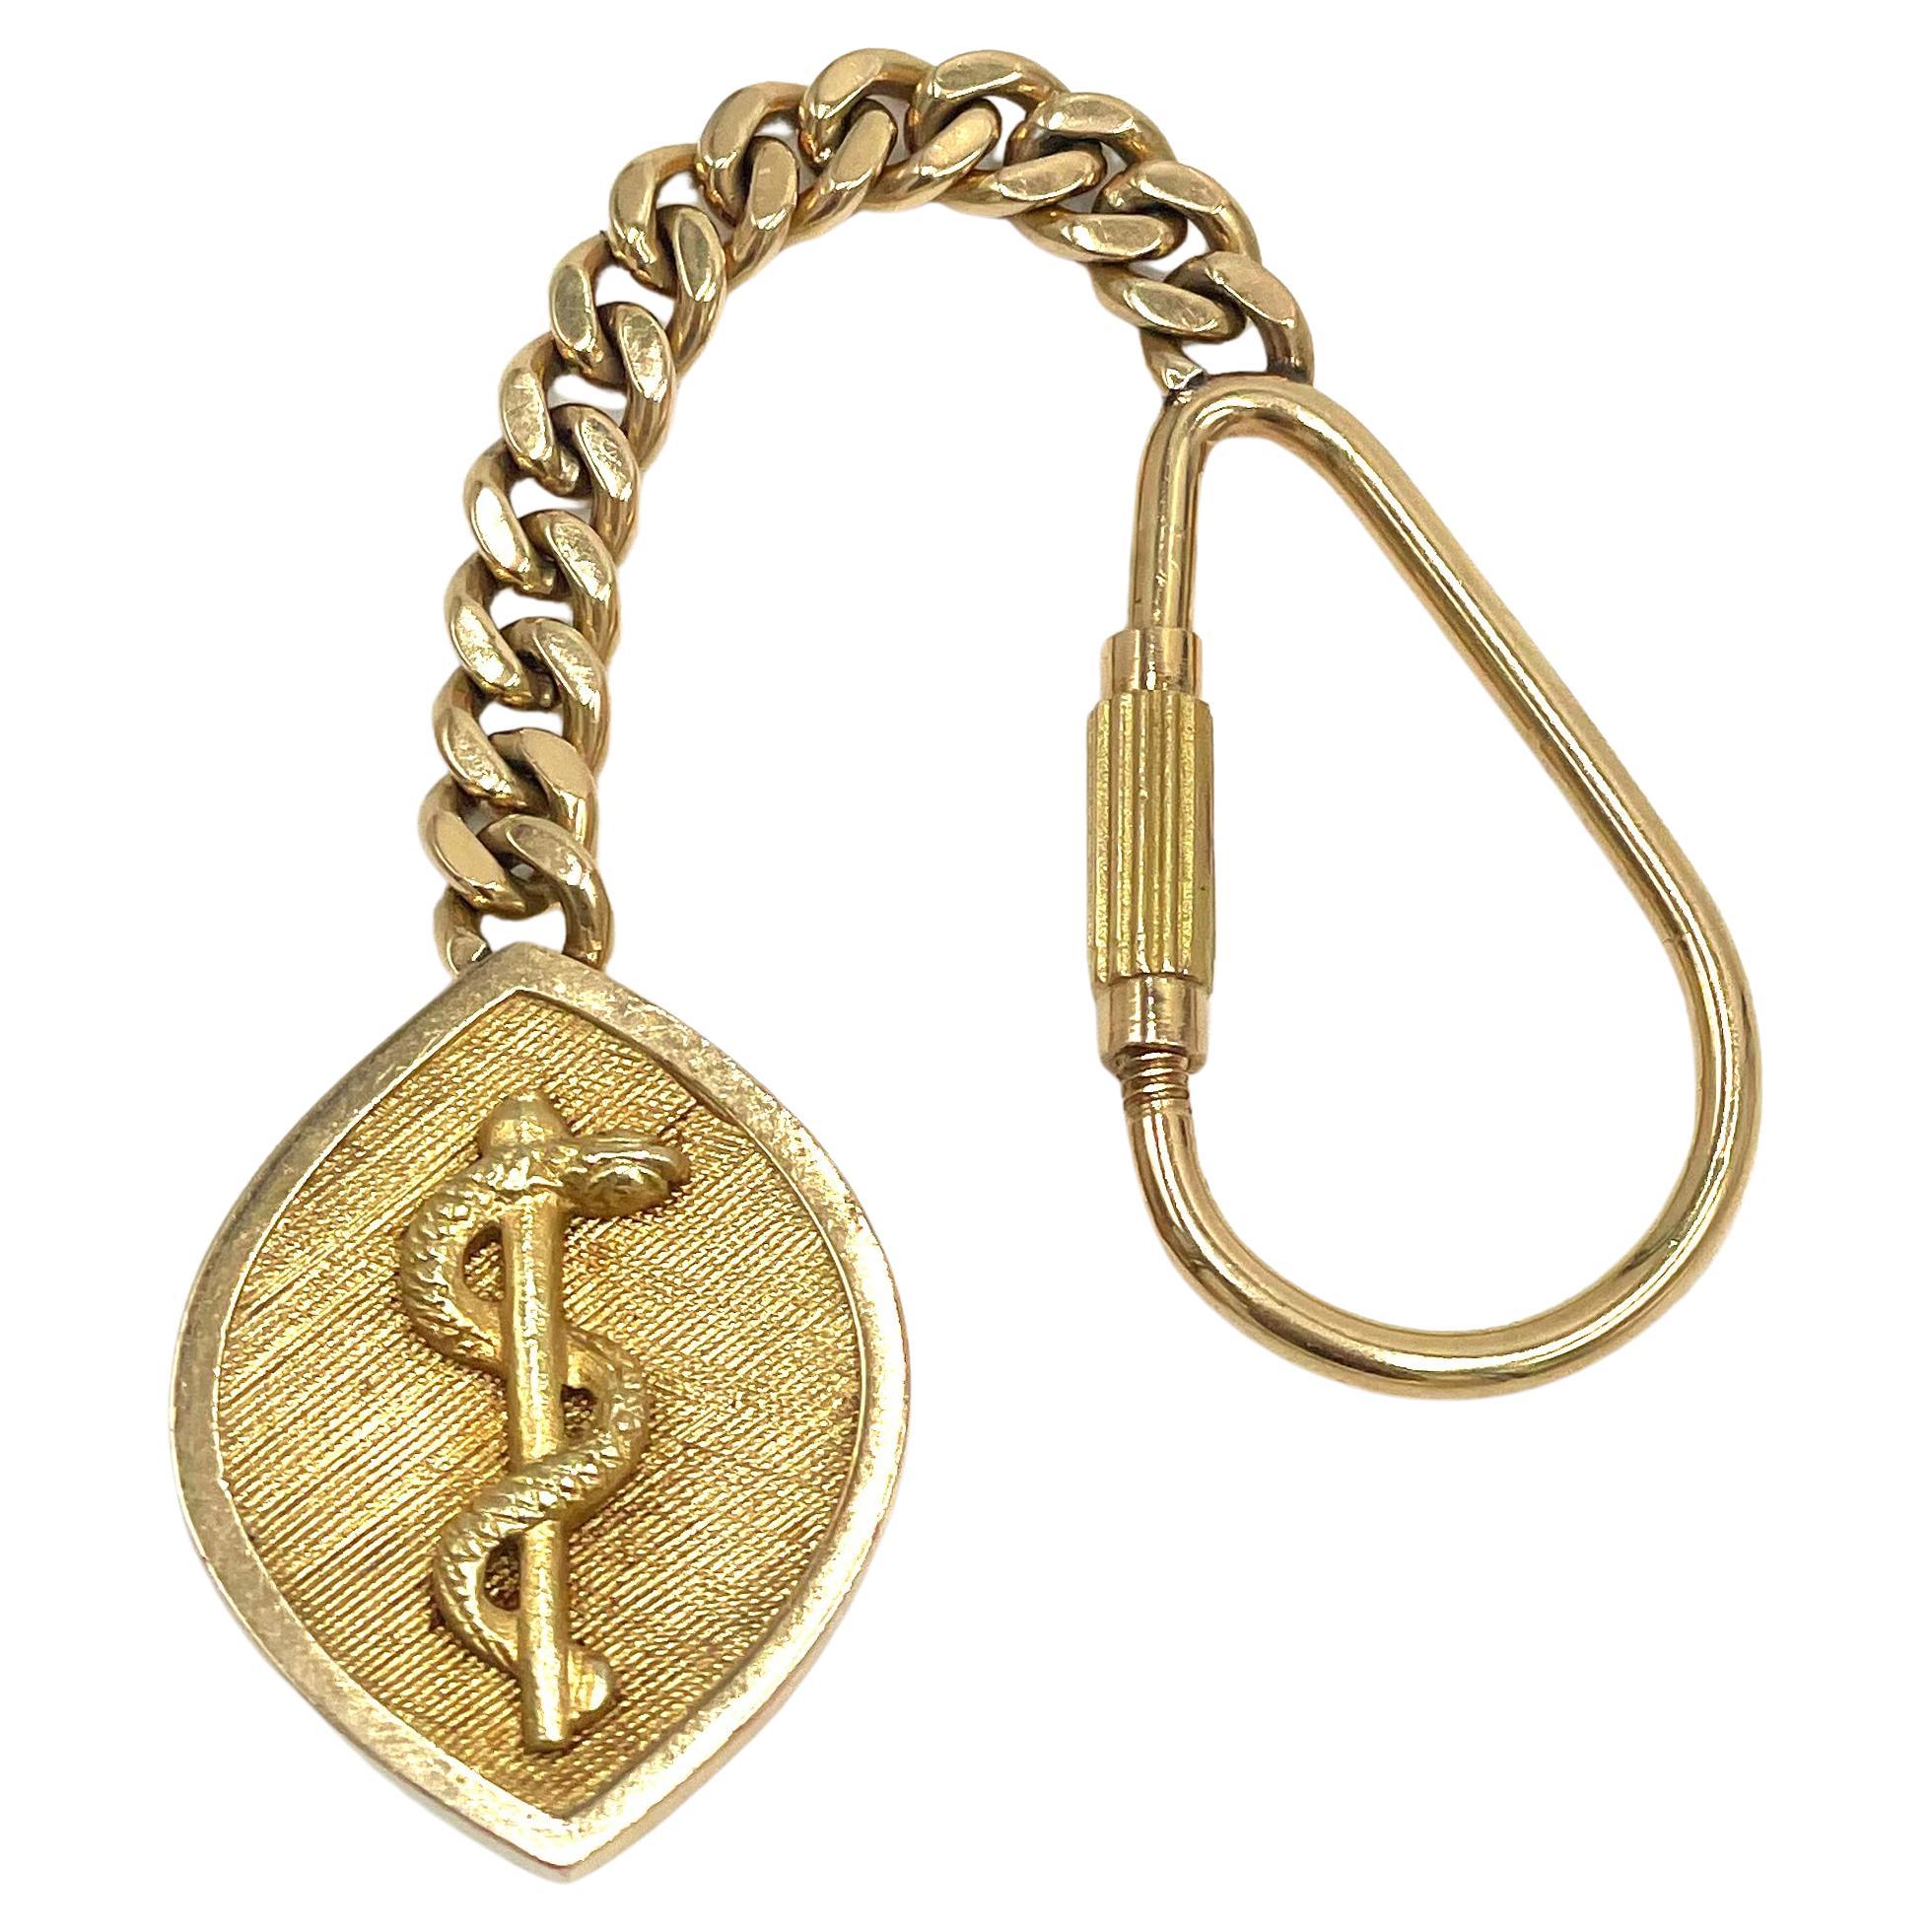 14K Yellow Gold Key Chain with the Rod of Asclepius. For Sale